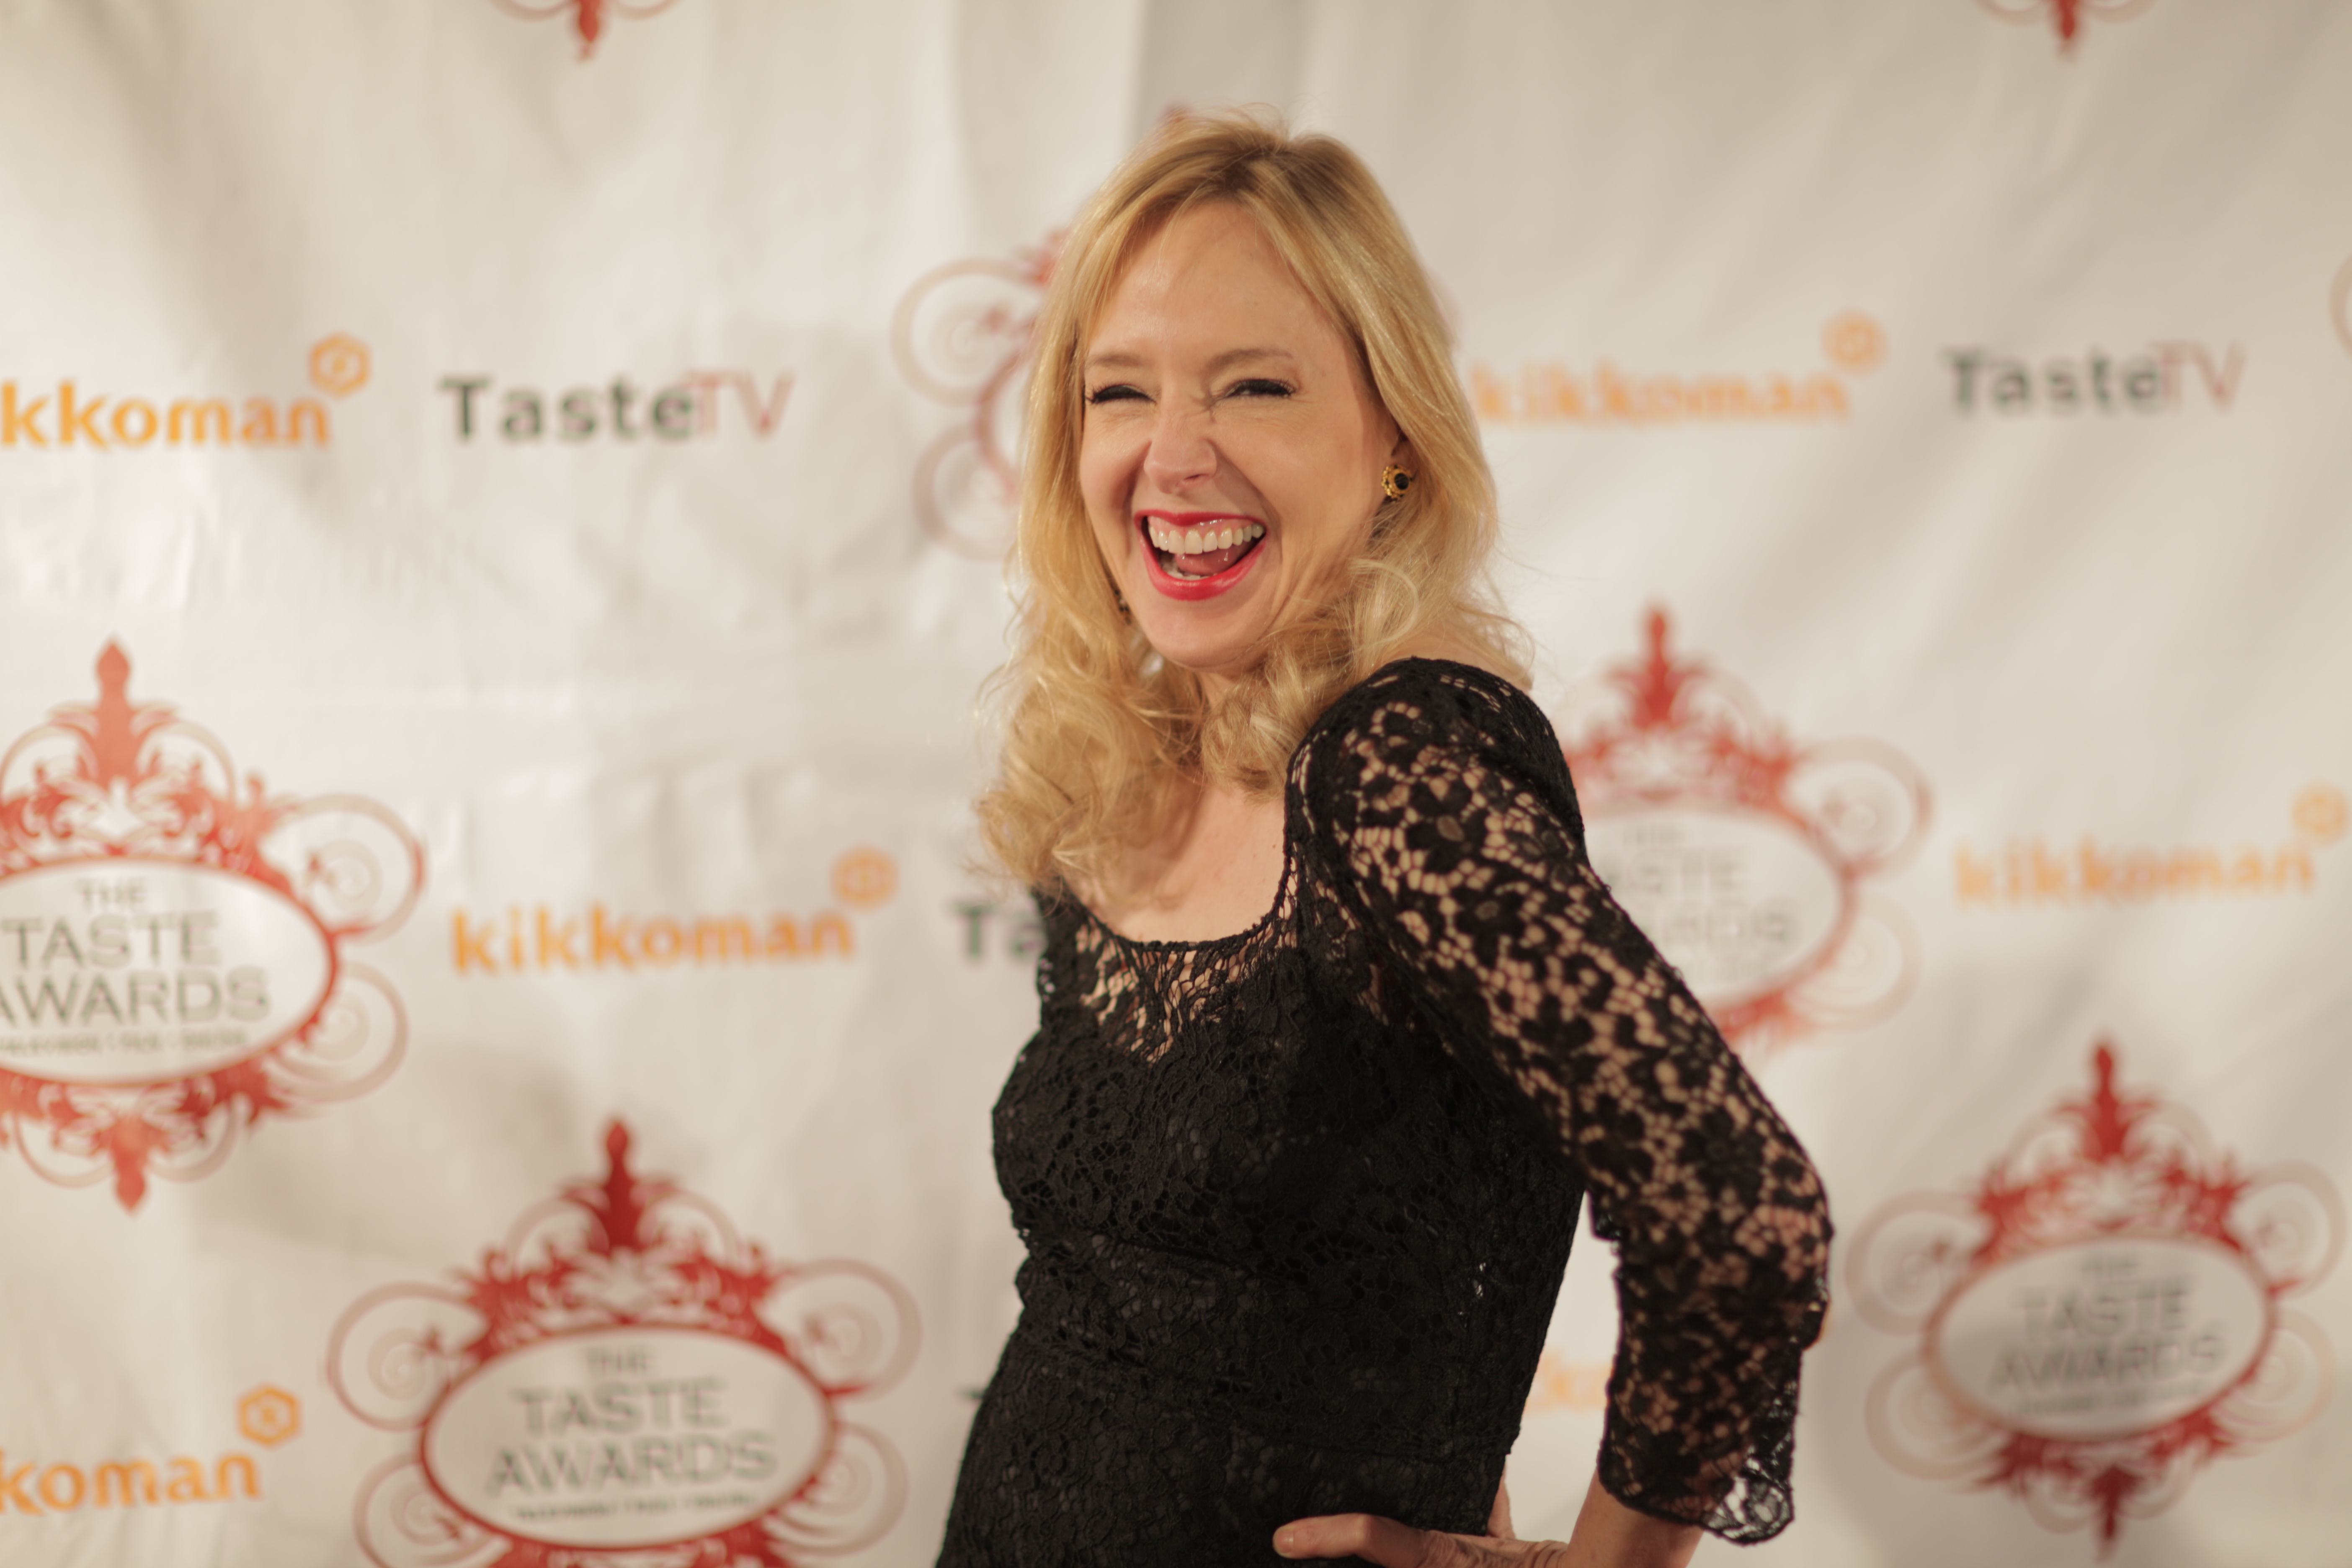 Holly Fulger, Creator and Host of Speaking of Beauty, at the Taste Awards. Speaking of Beauty was a nominee.